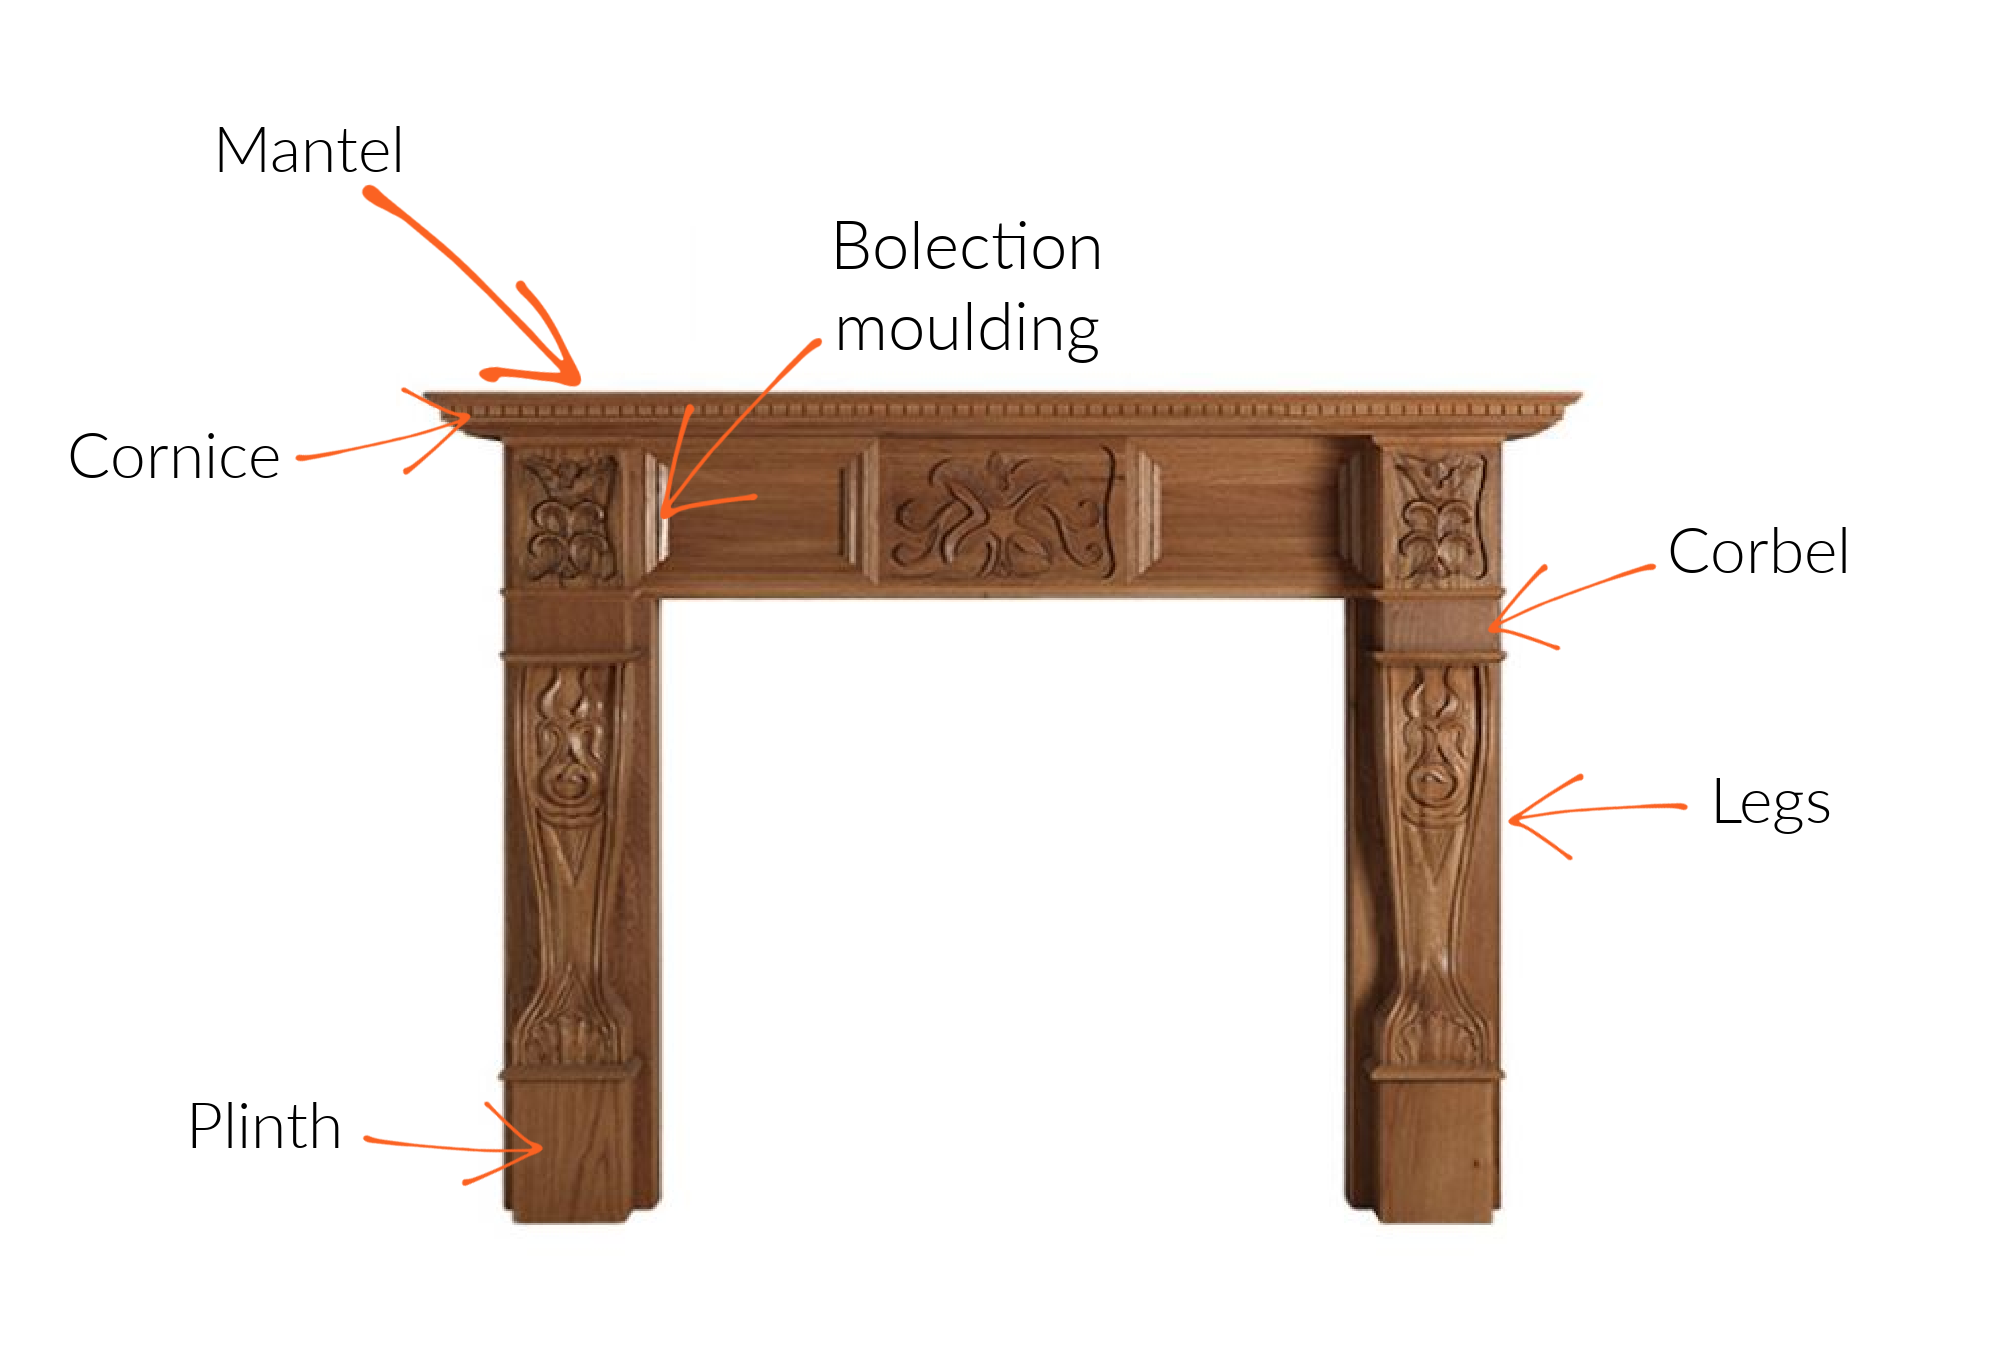 The anatomy of a fire surround